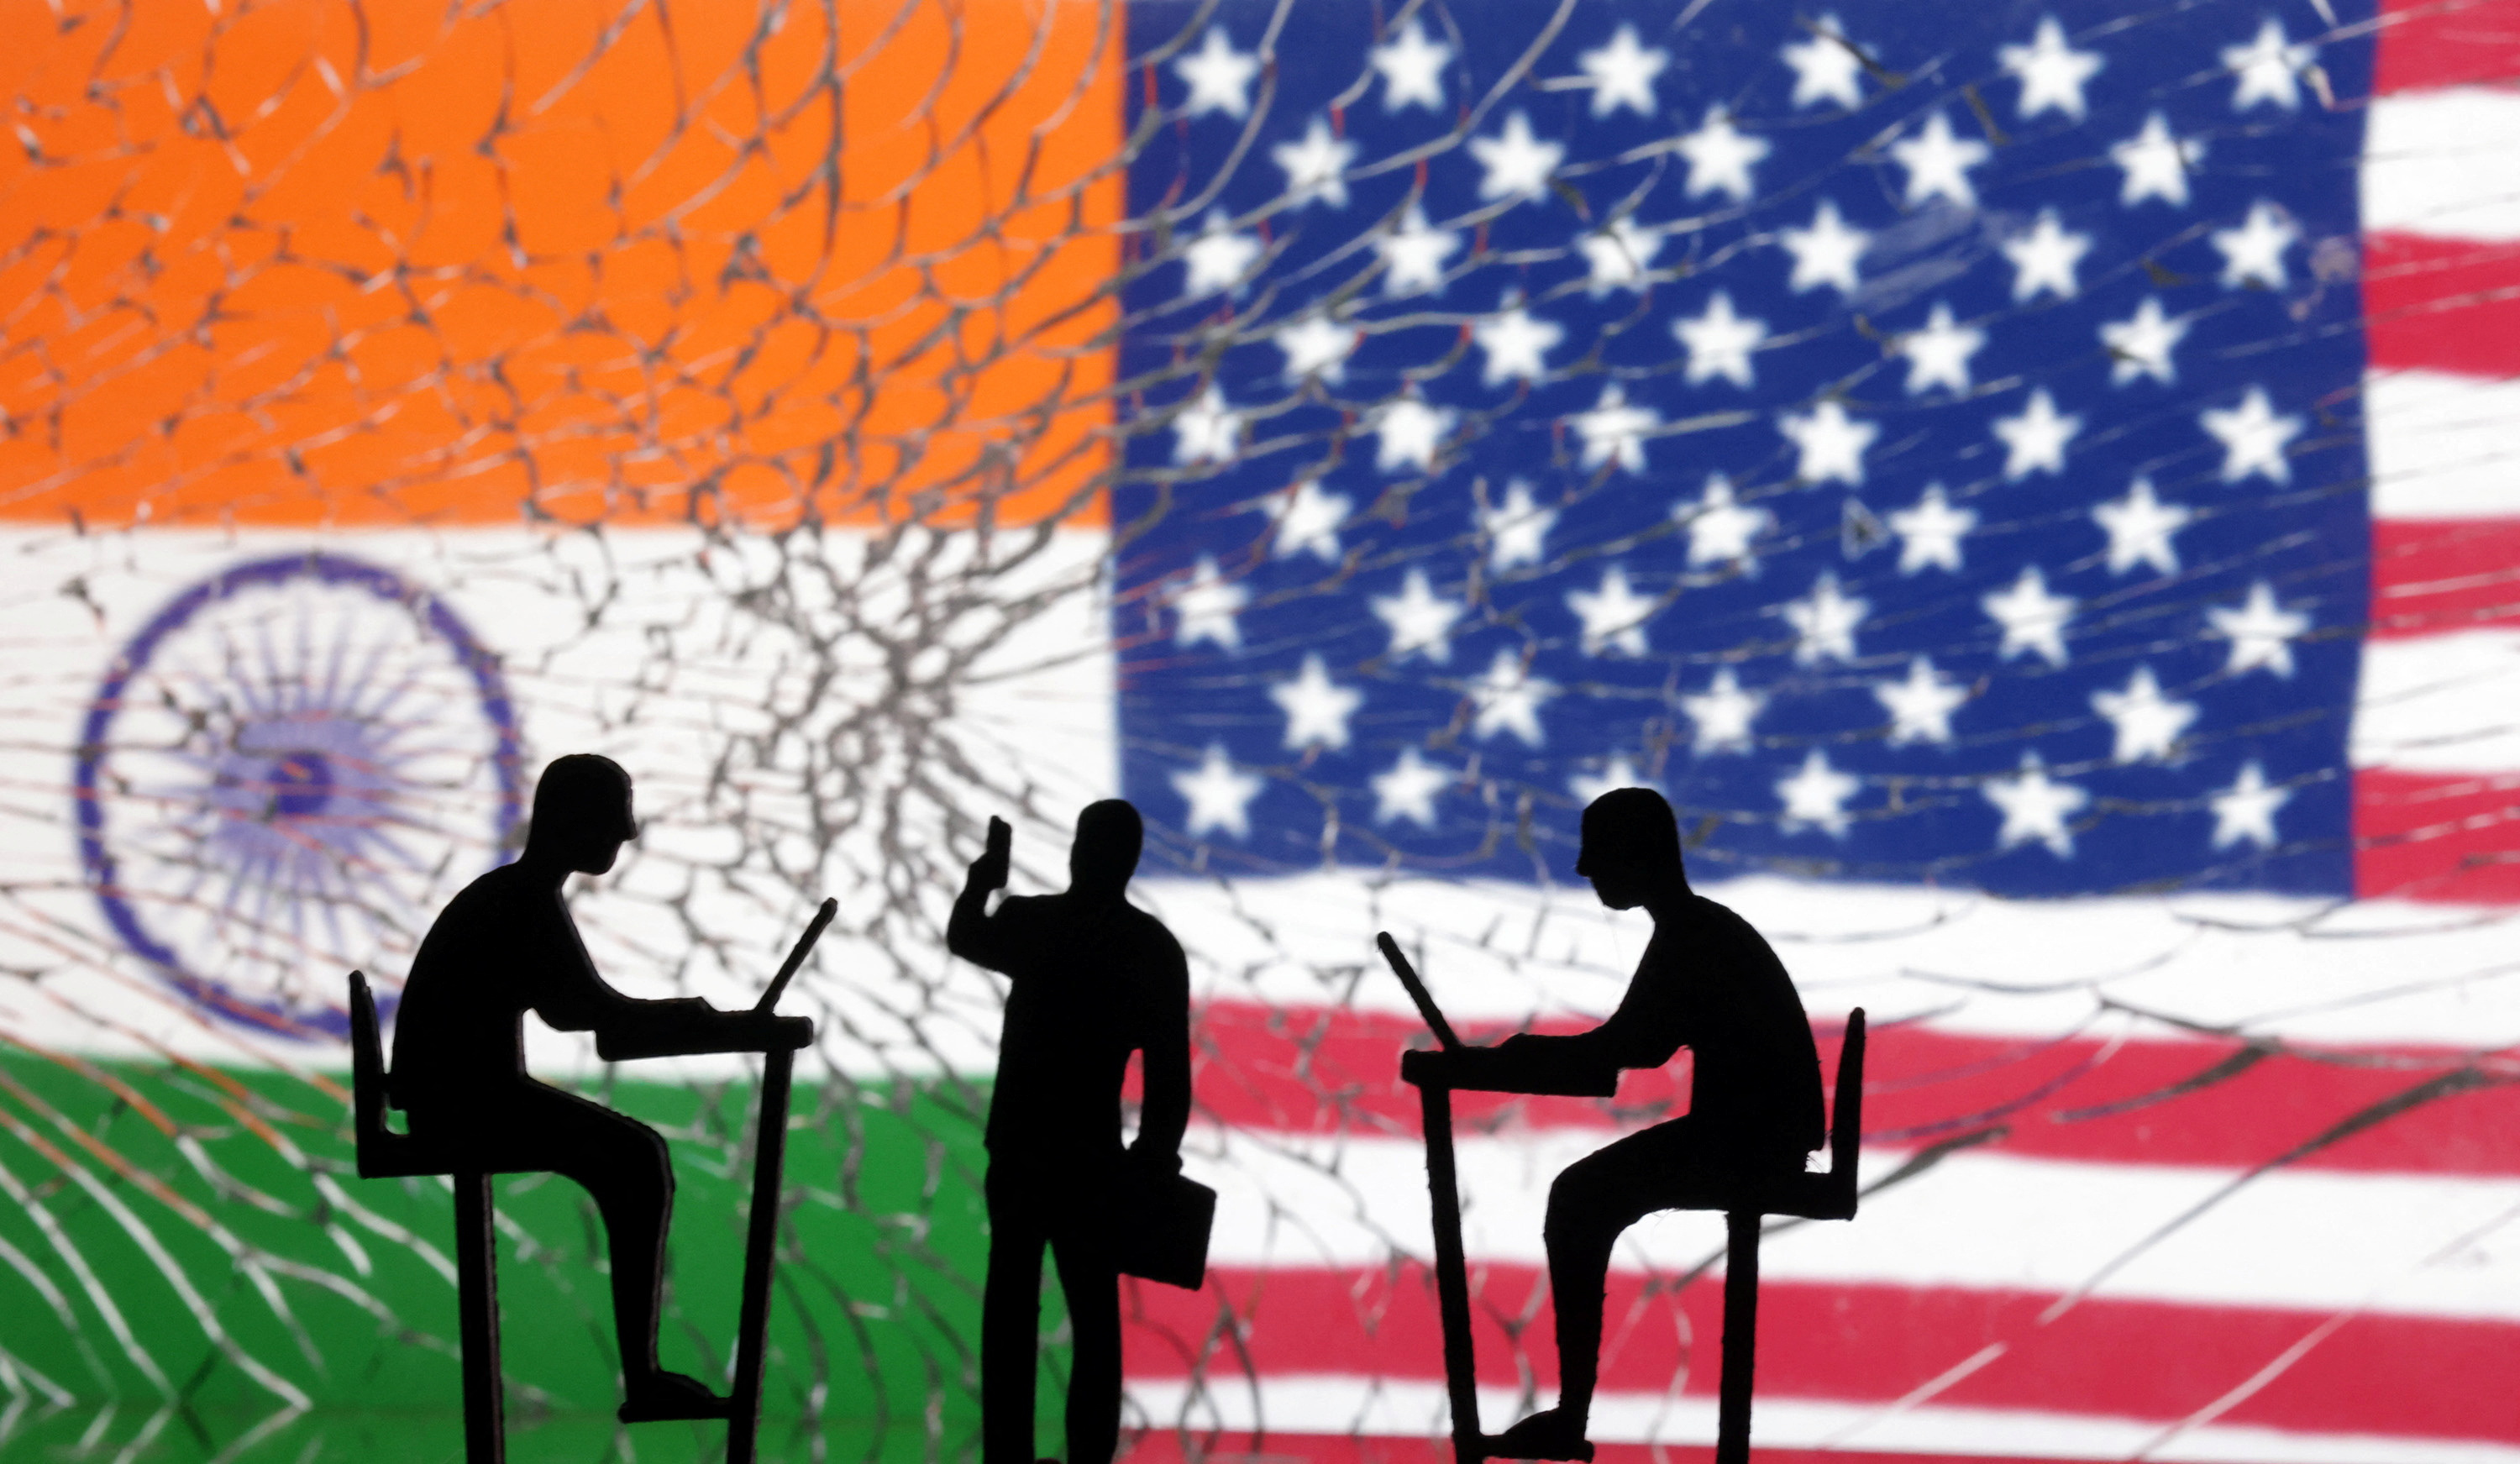 Illustration shows the Indian and U.S. flags and people miniatures